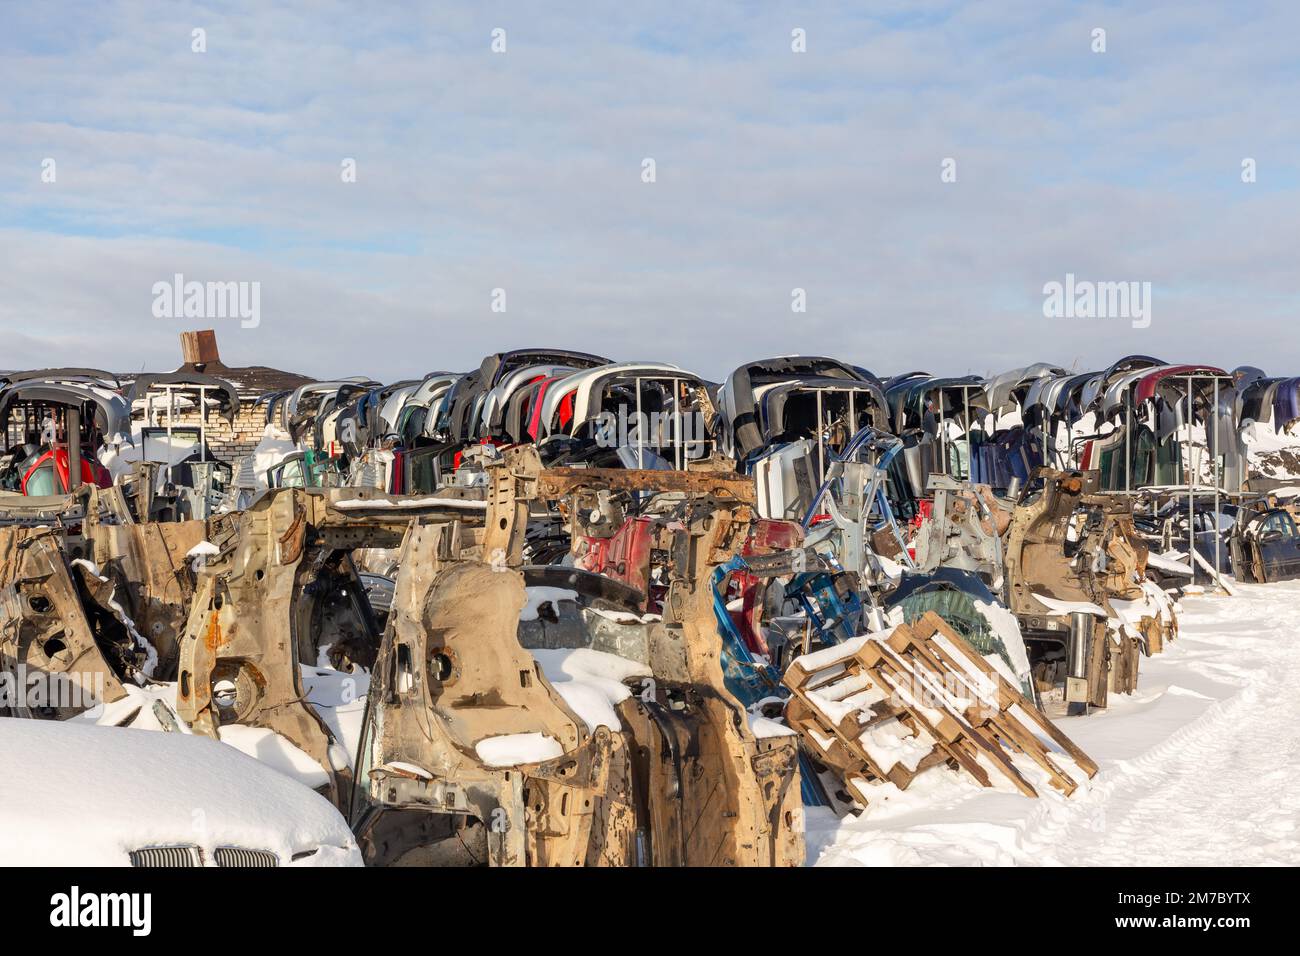 Disassembled cars on a car dump are on sale for spare parts. A stack of spars and bumpers. Trade in used spare parts is a common business in developin Stock Photo